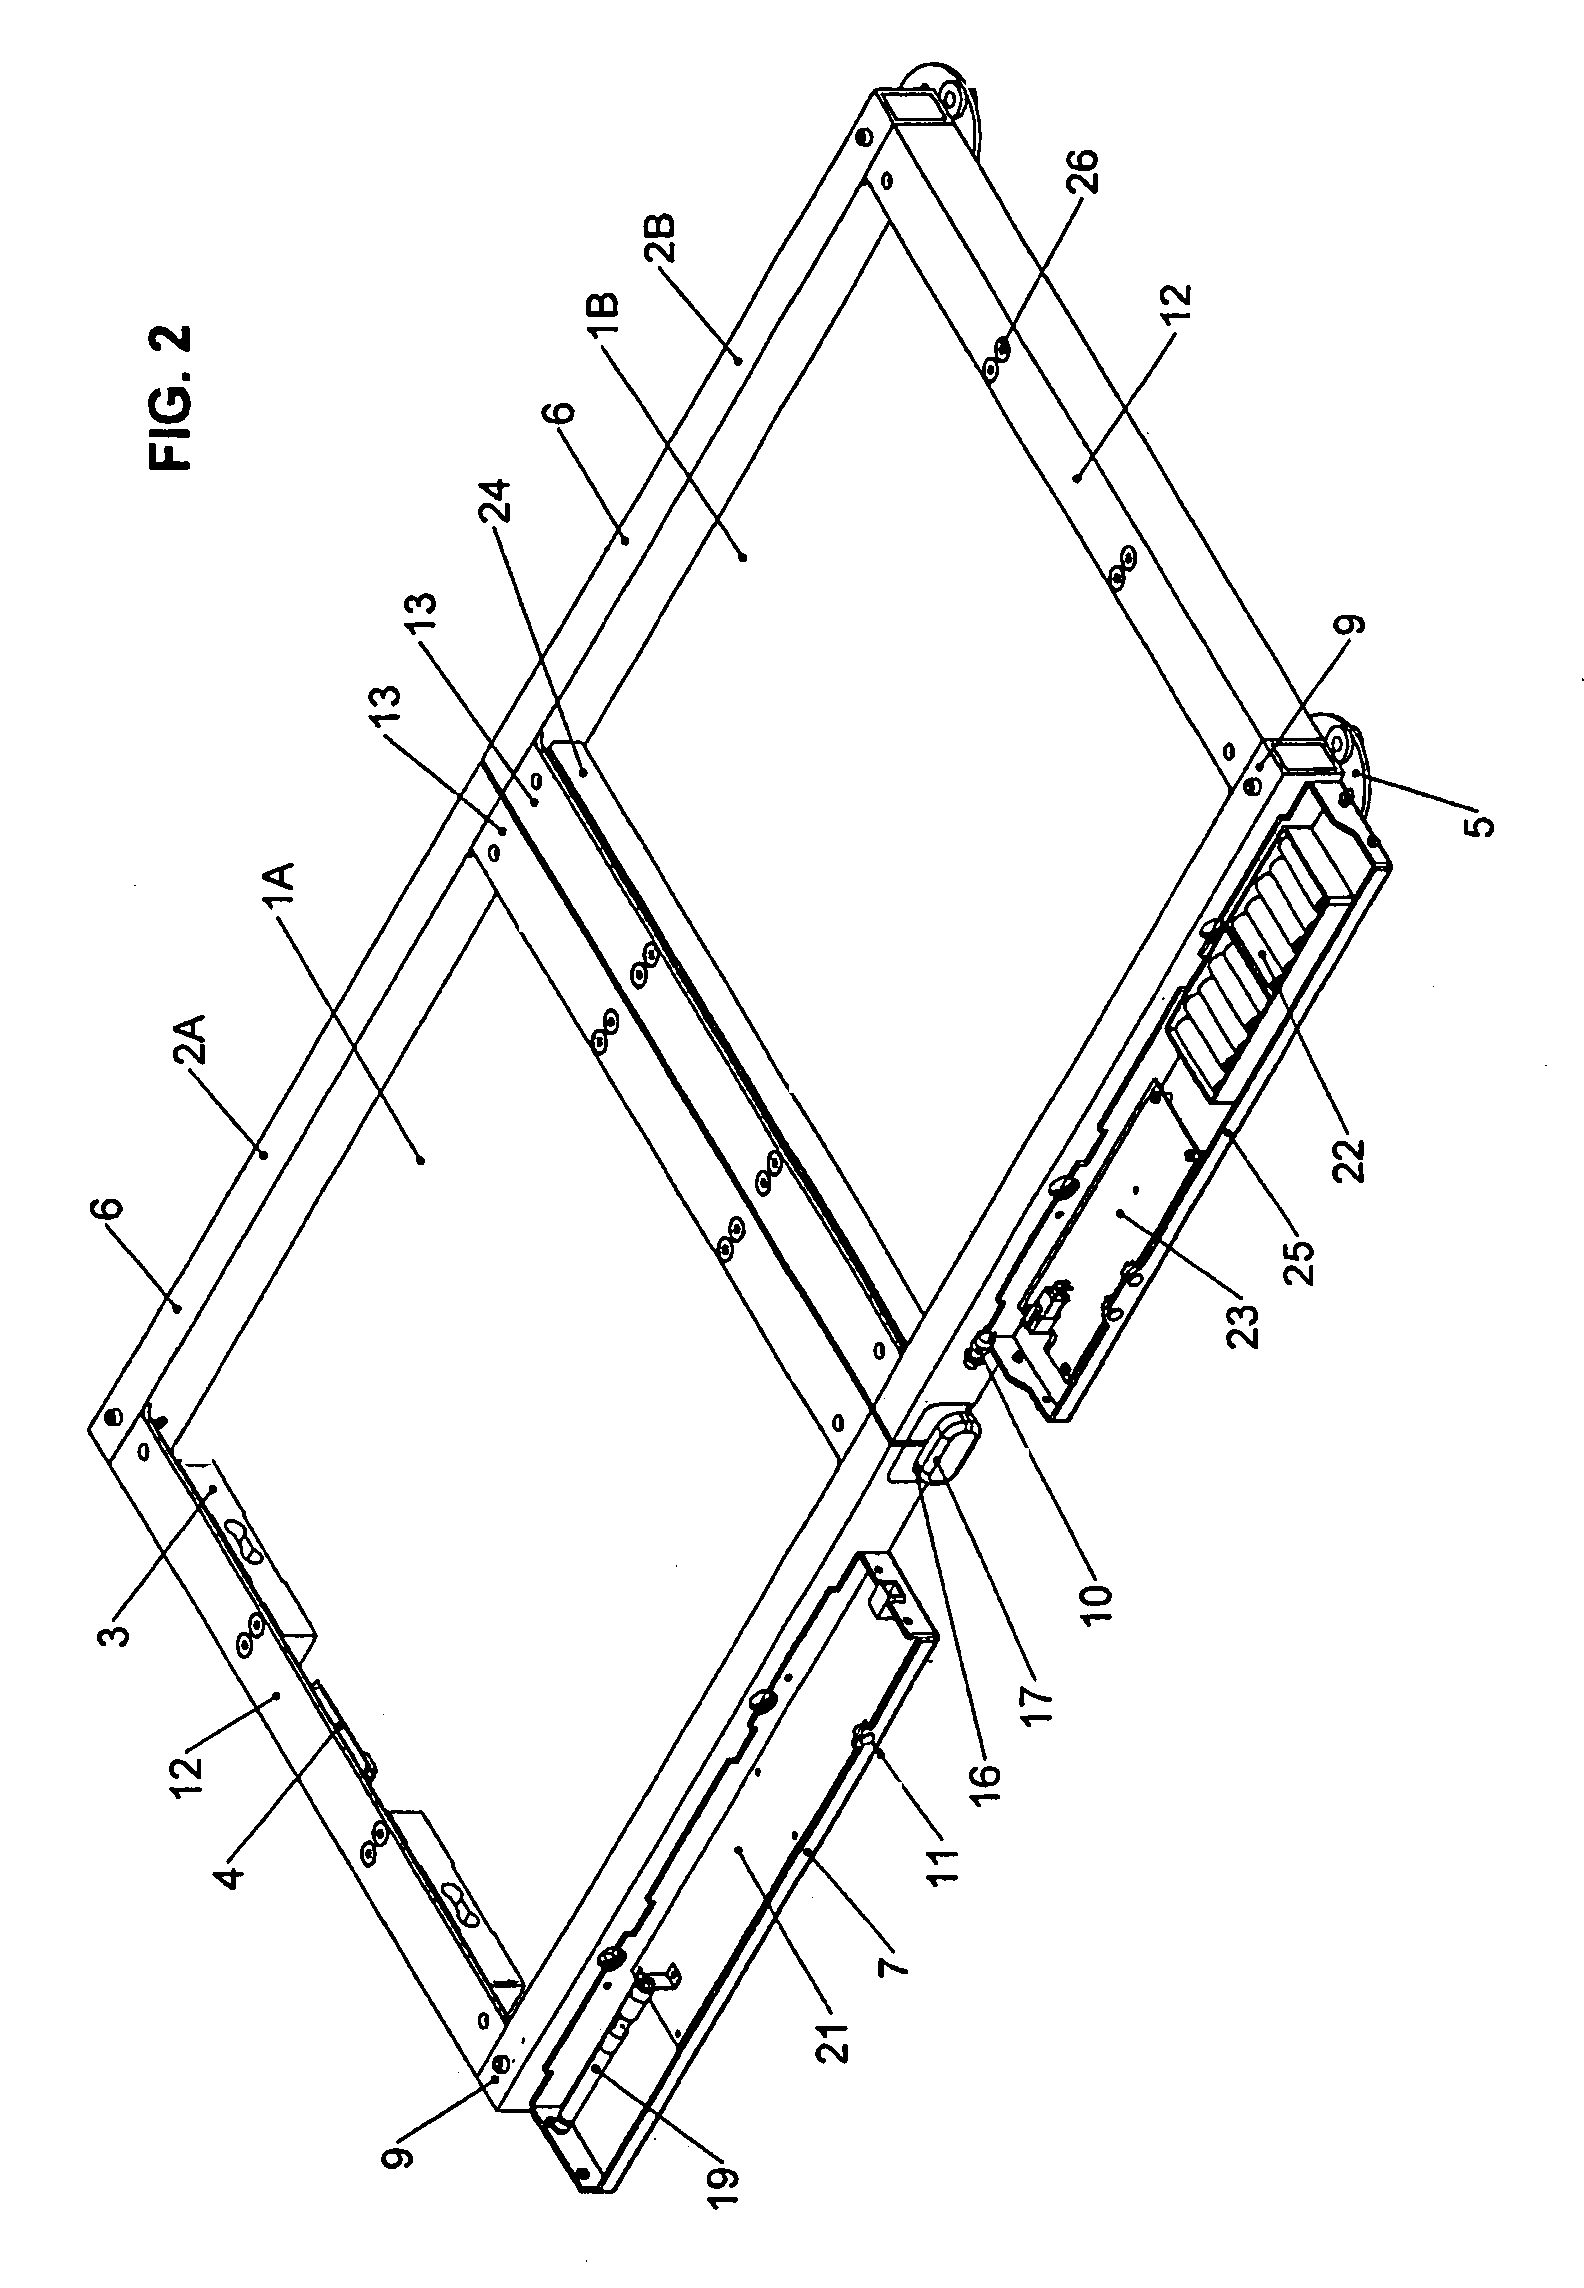 Dual force plate apparatus